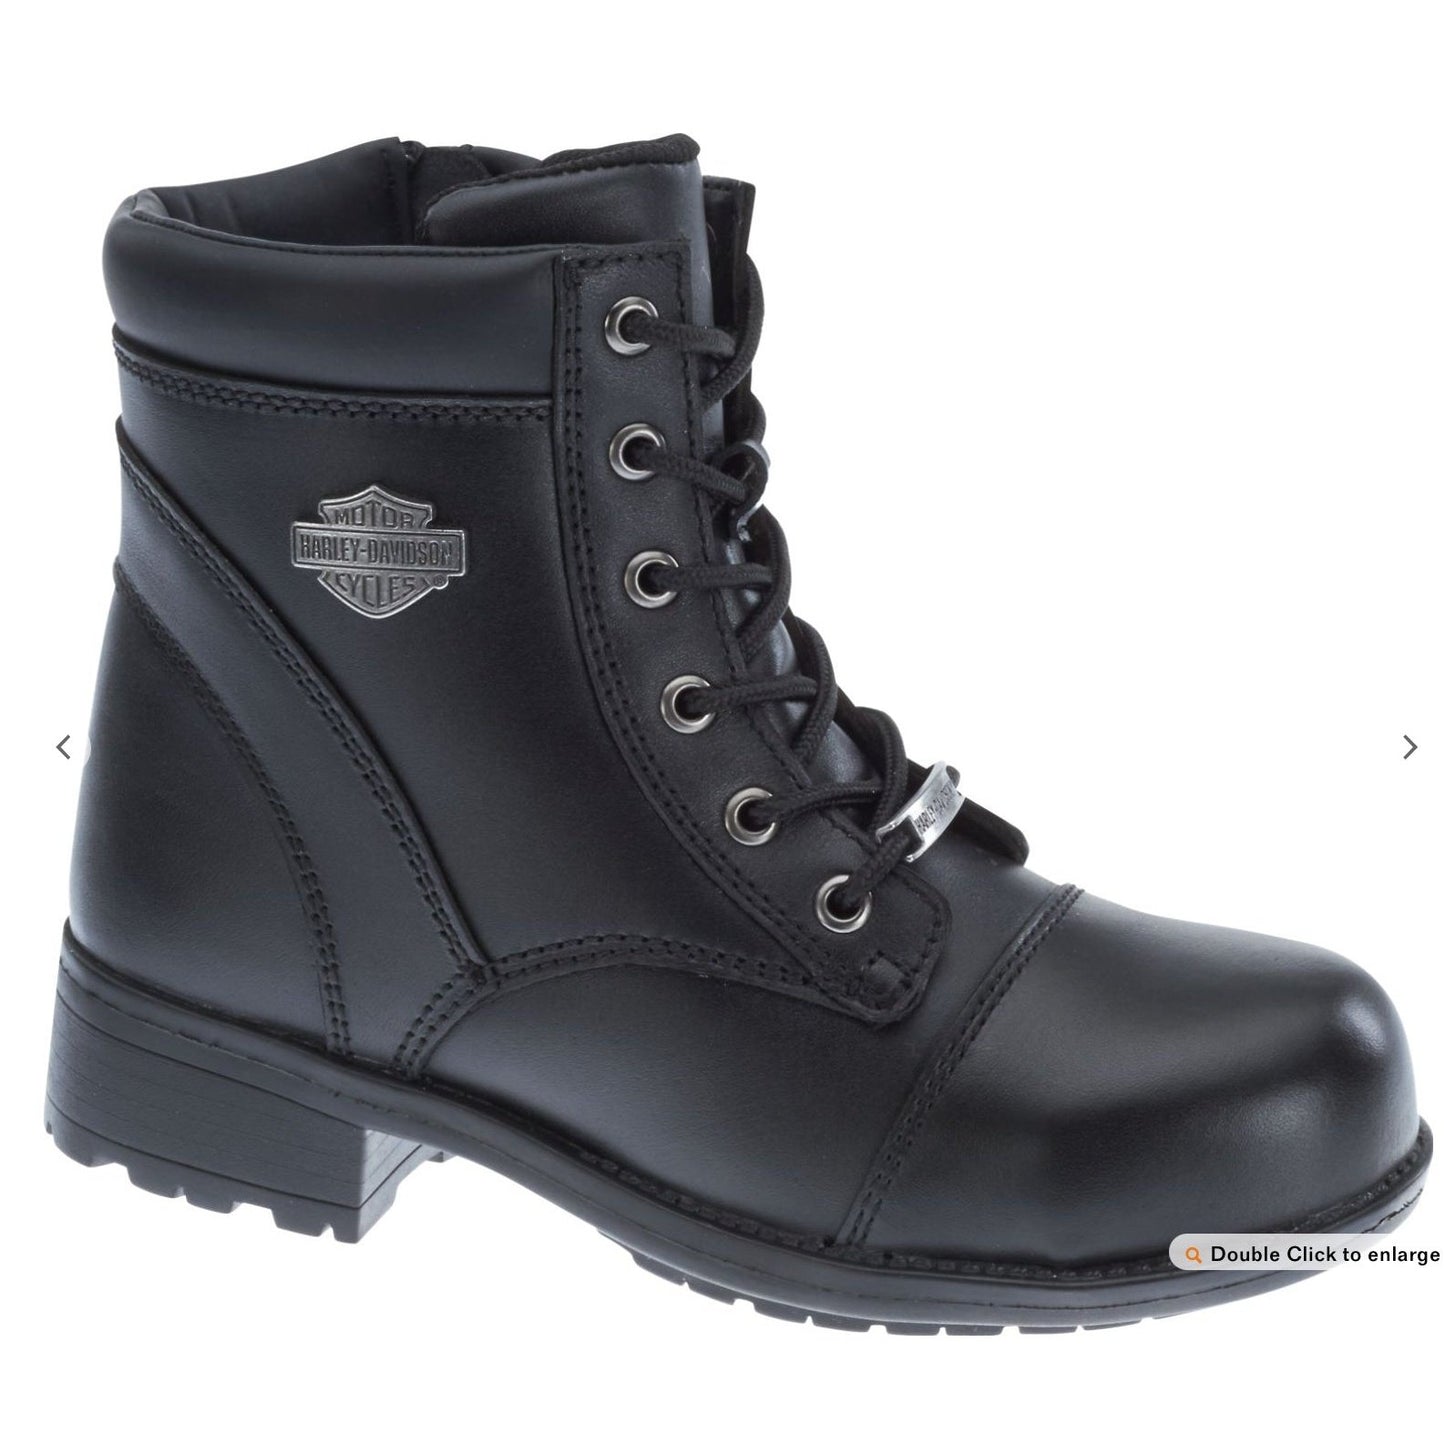 Harley Davidson Women’s Connie CSA Boots 11022 - CLEARANCE